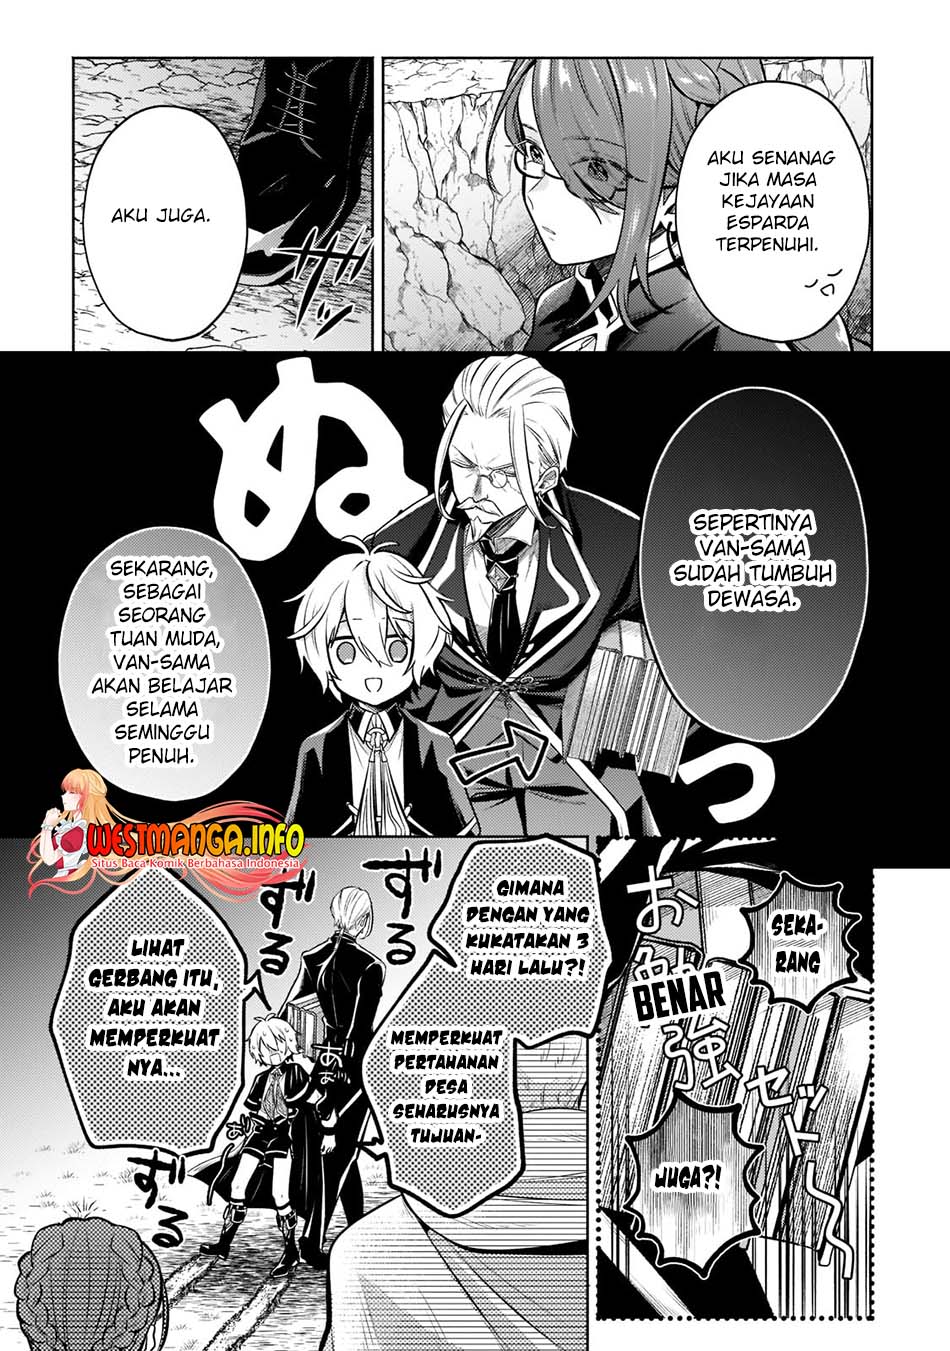 Fun Territory Defense Of The Easy-Going Lord ~The Nameless Village Is Made Into The Strongest Fortified City By Production Magic~ Chapter 09 - 183